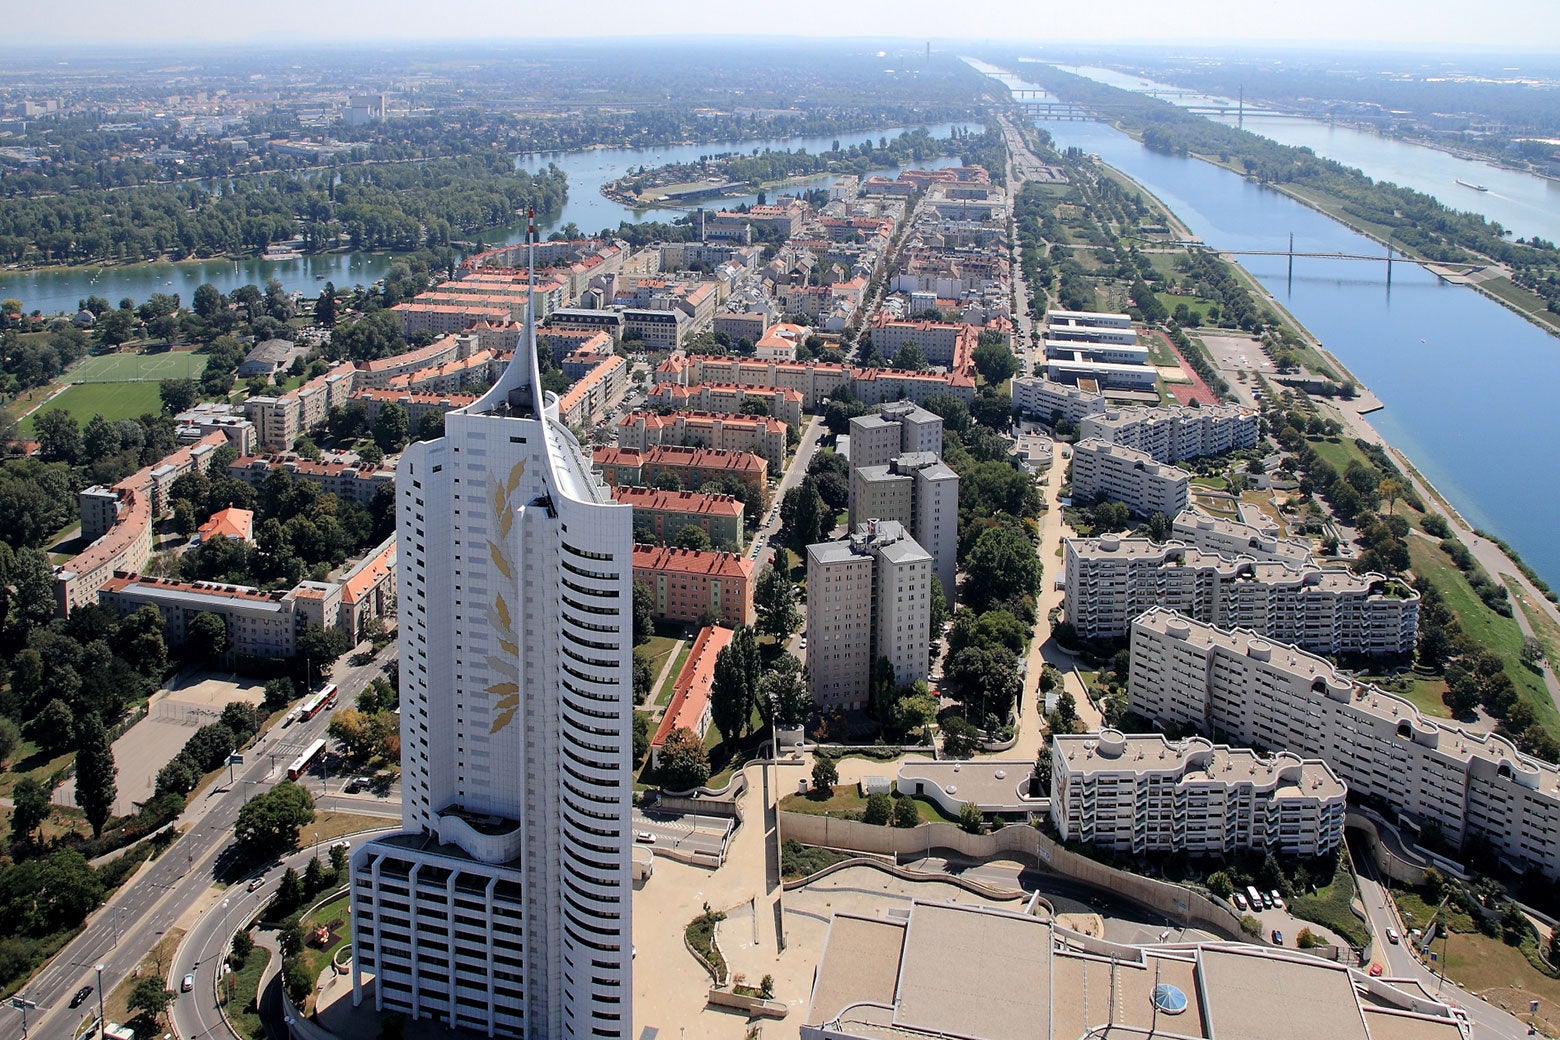 A modern-looking, large housing project, along the Danube River, seen from above.